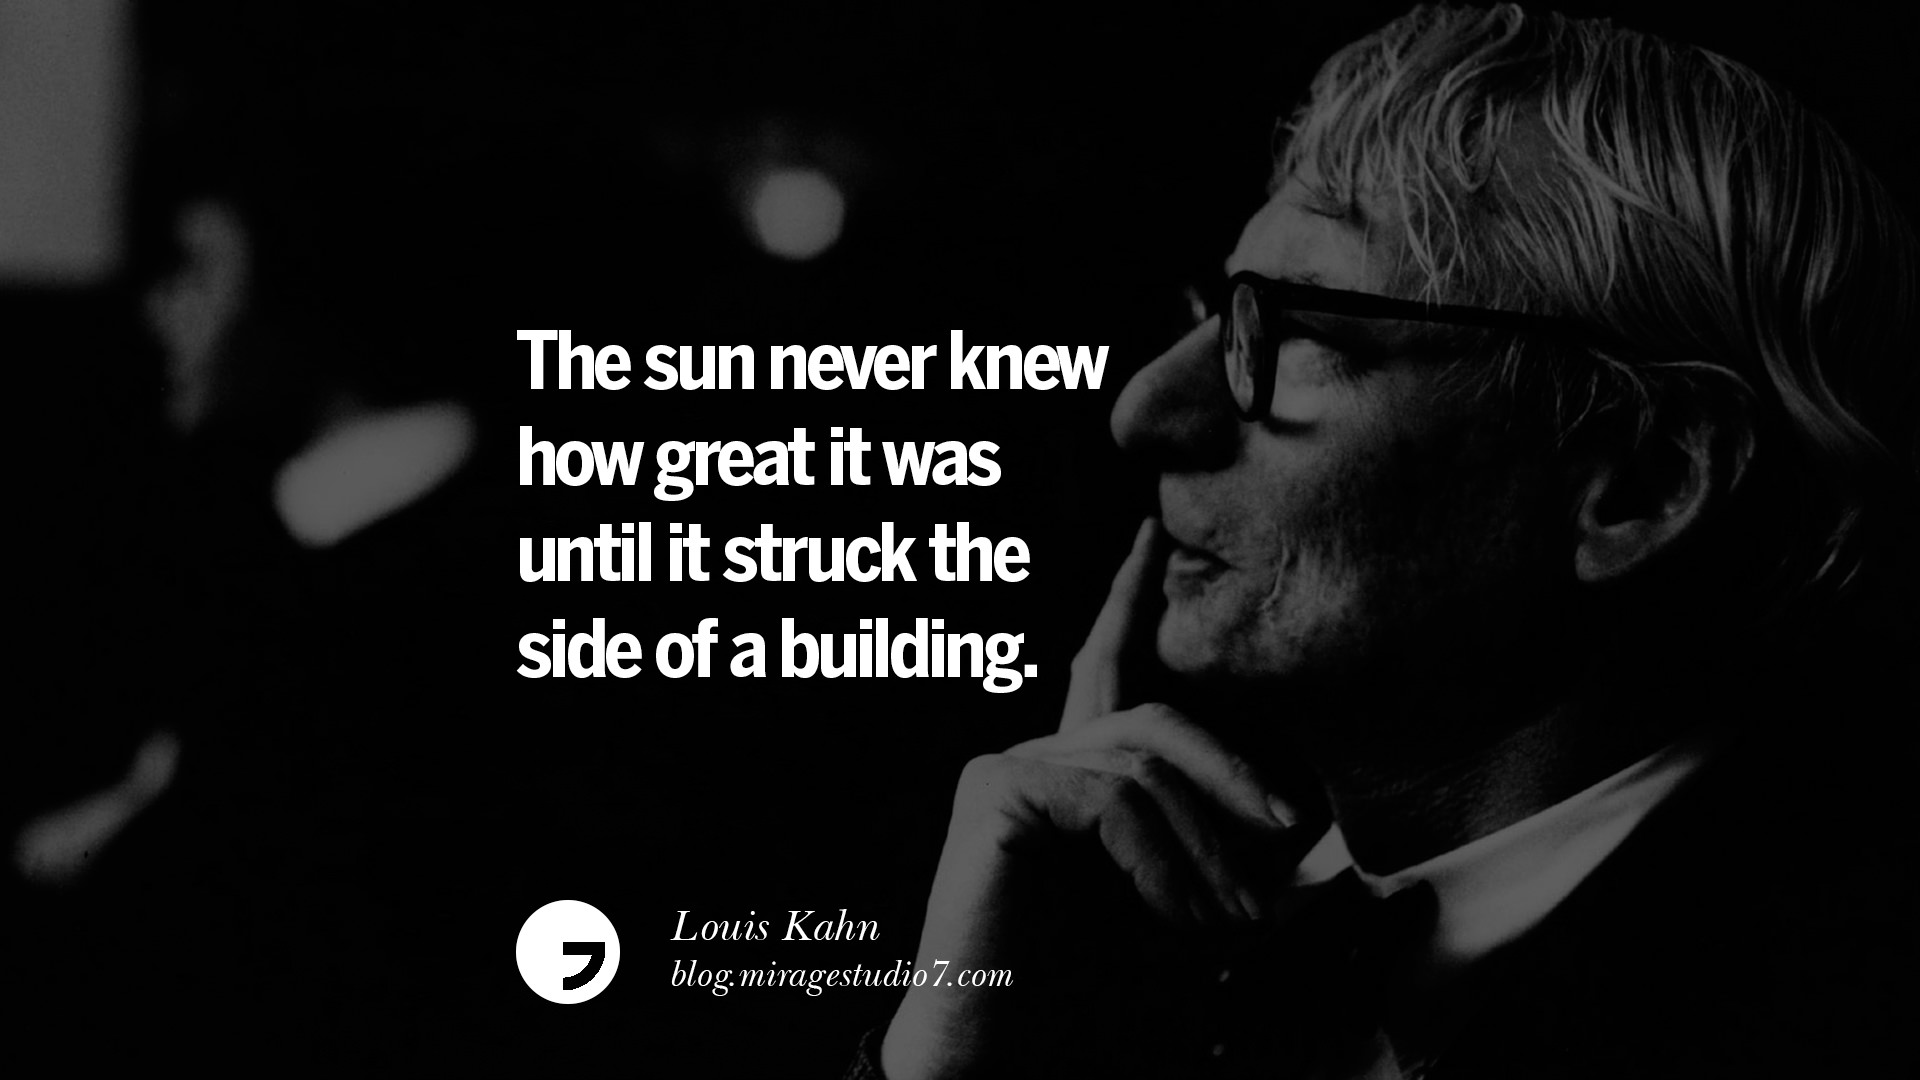 10-quotes-by-famous-architects-on-architecture